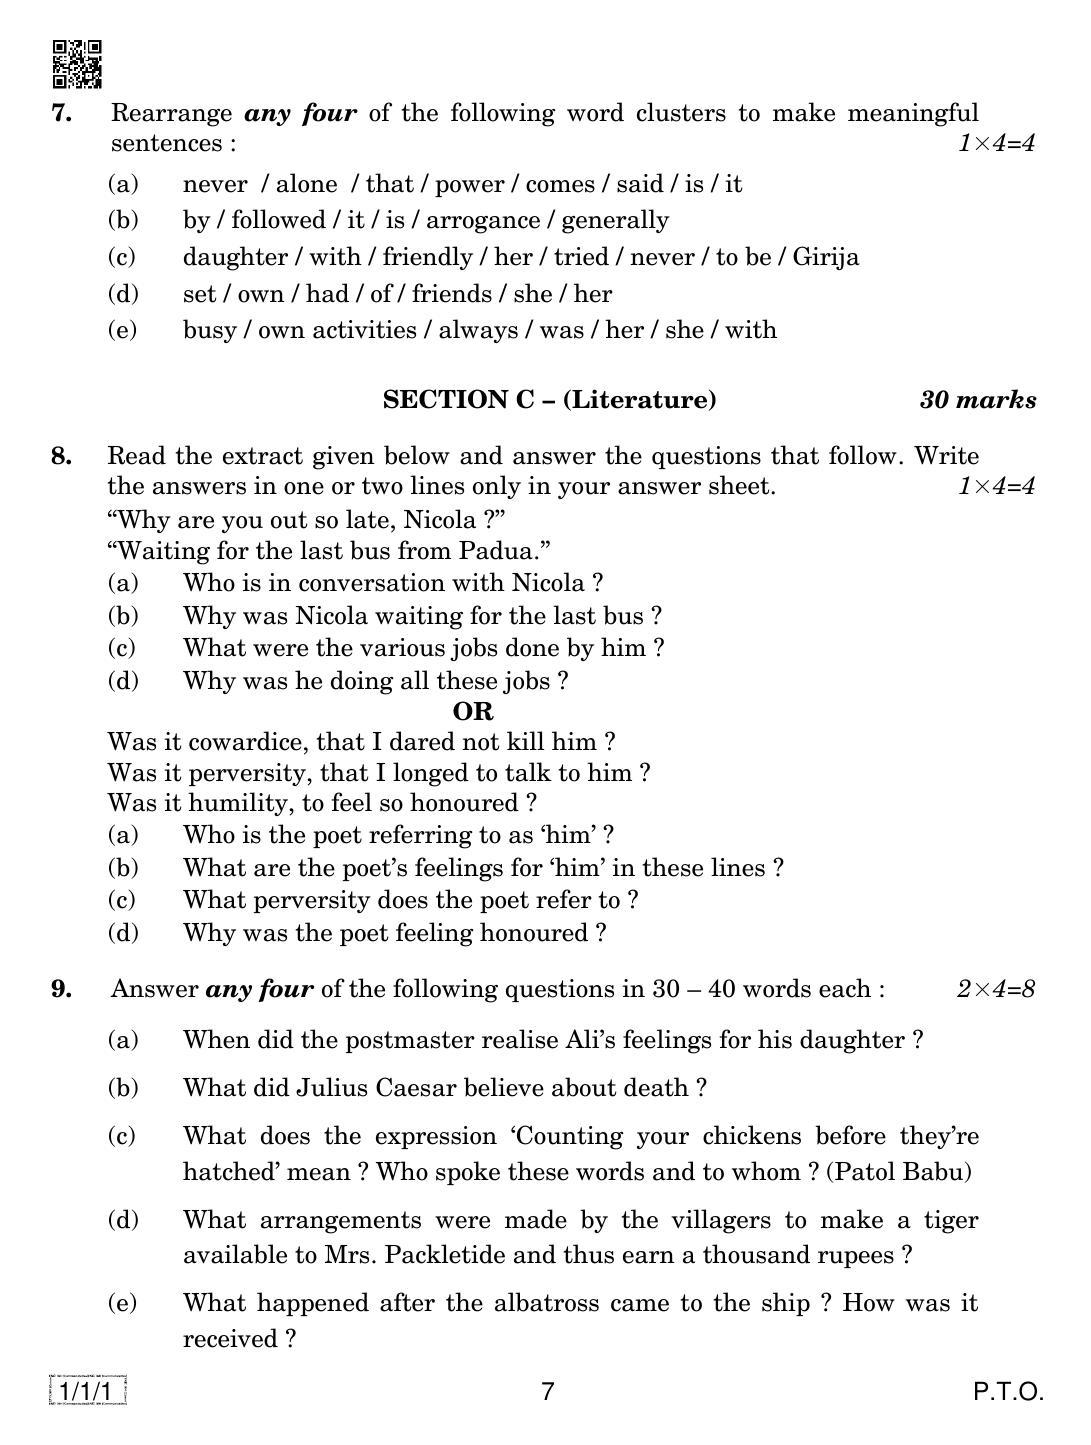 CBSE Class 10 1-1-1 ENGLISH COMM. 2019 Compartment Question Paper - Page 7